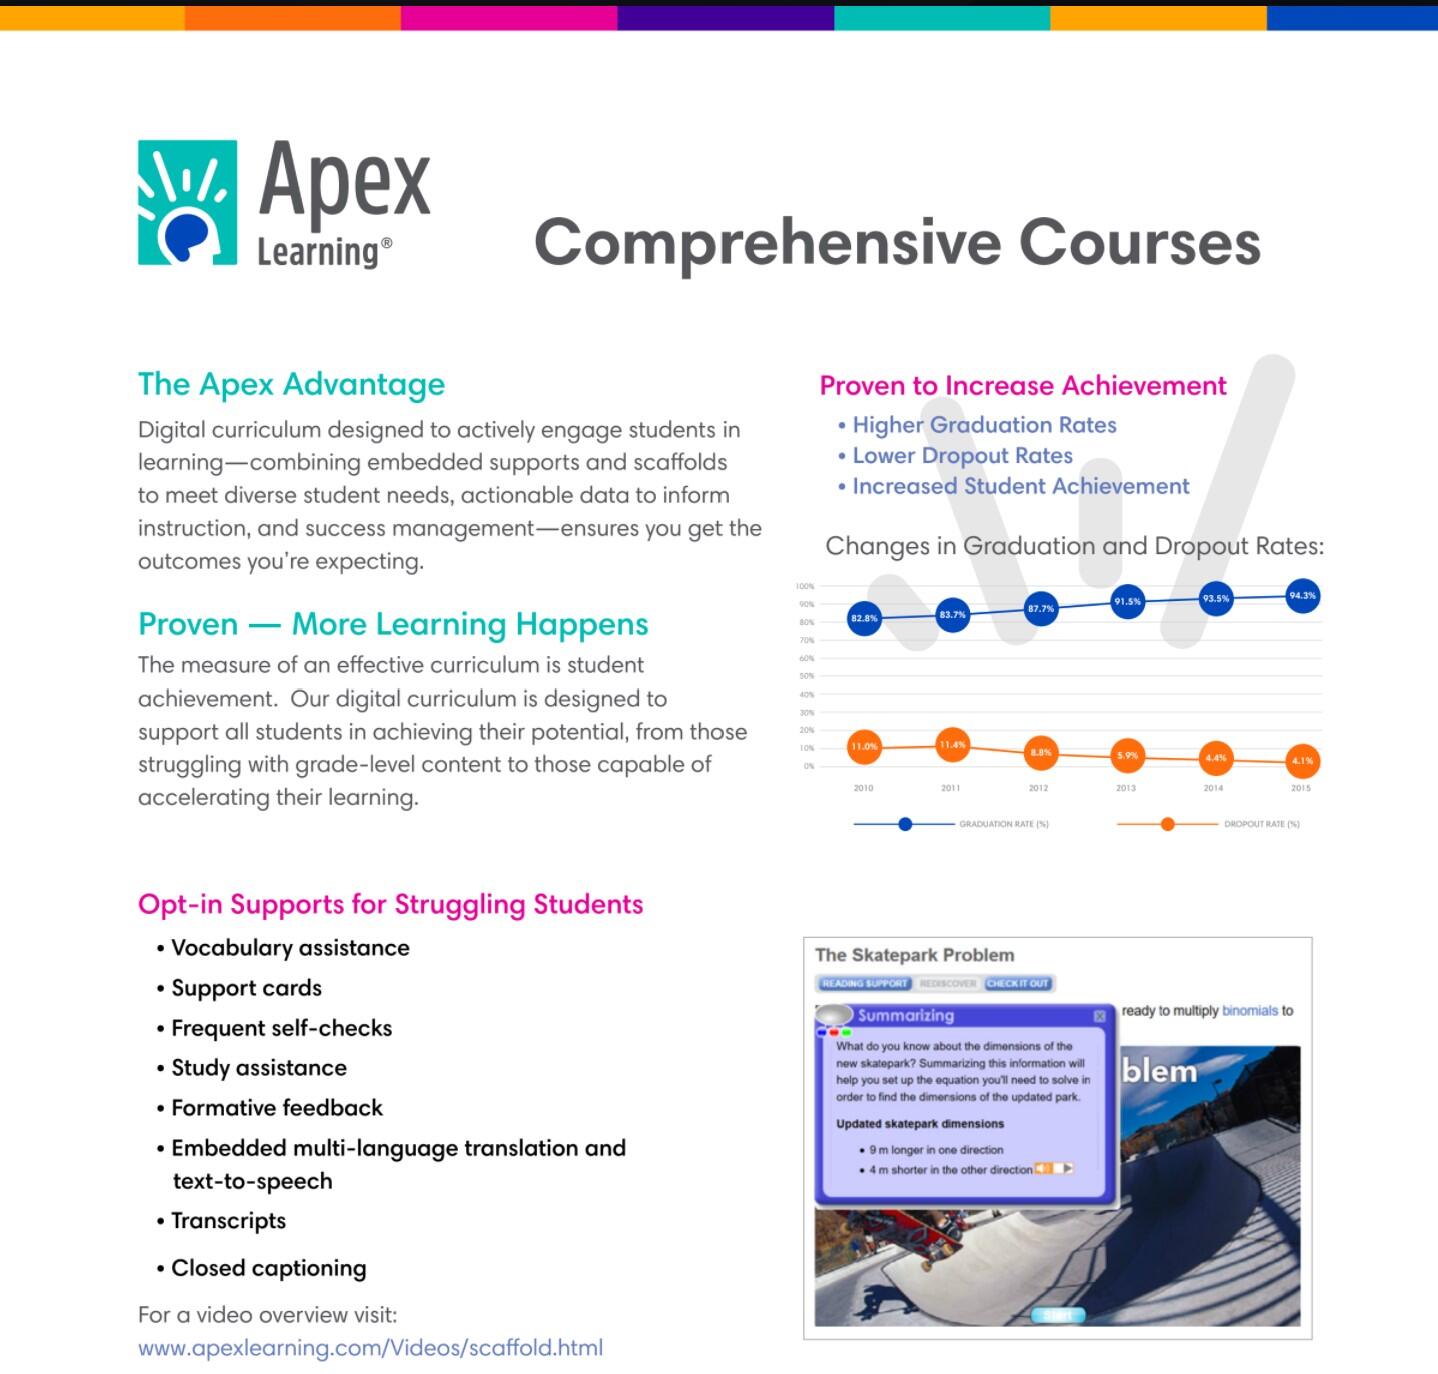 Comprehensive Courses from Apex Learning